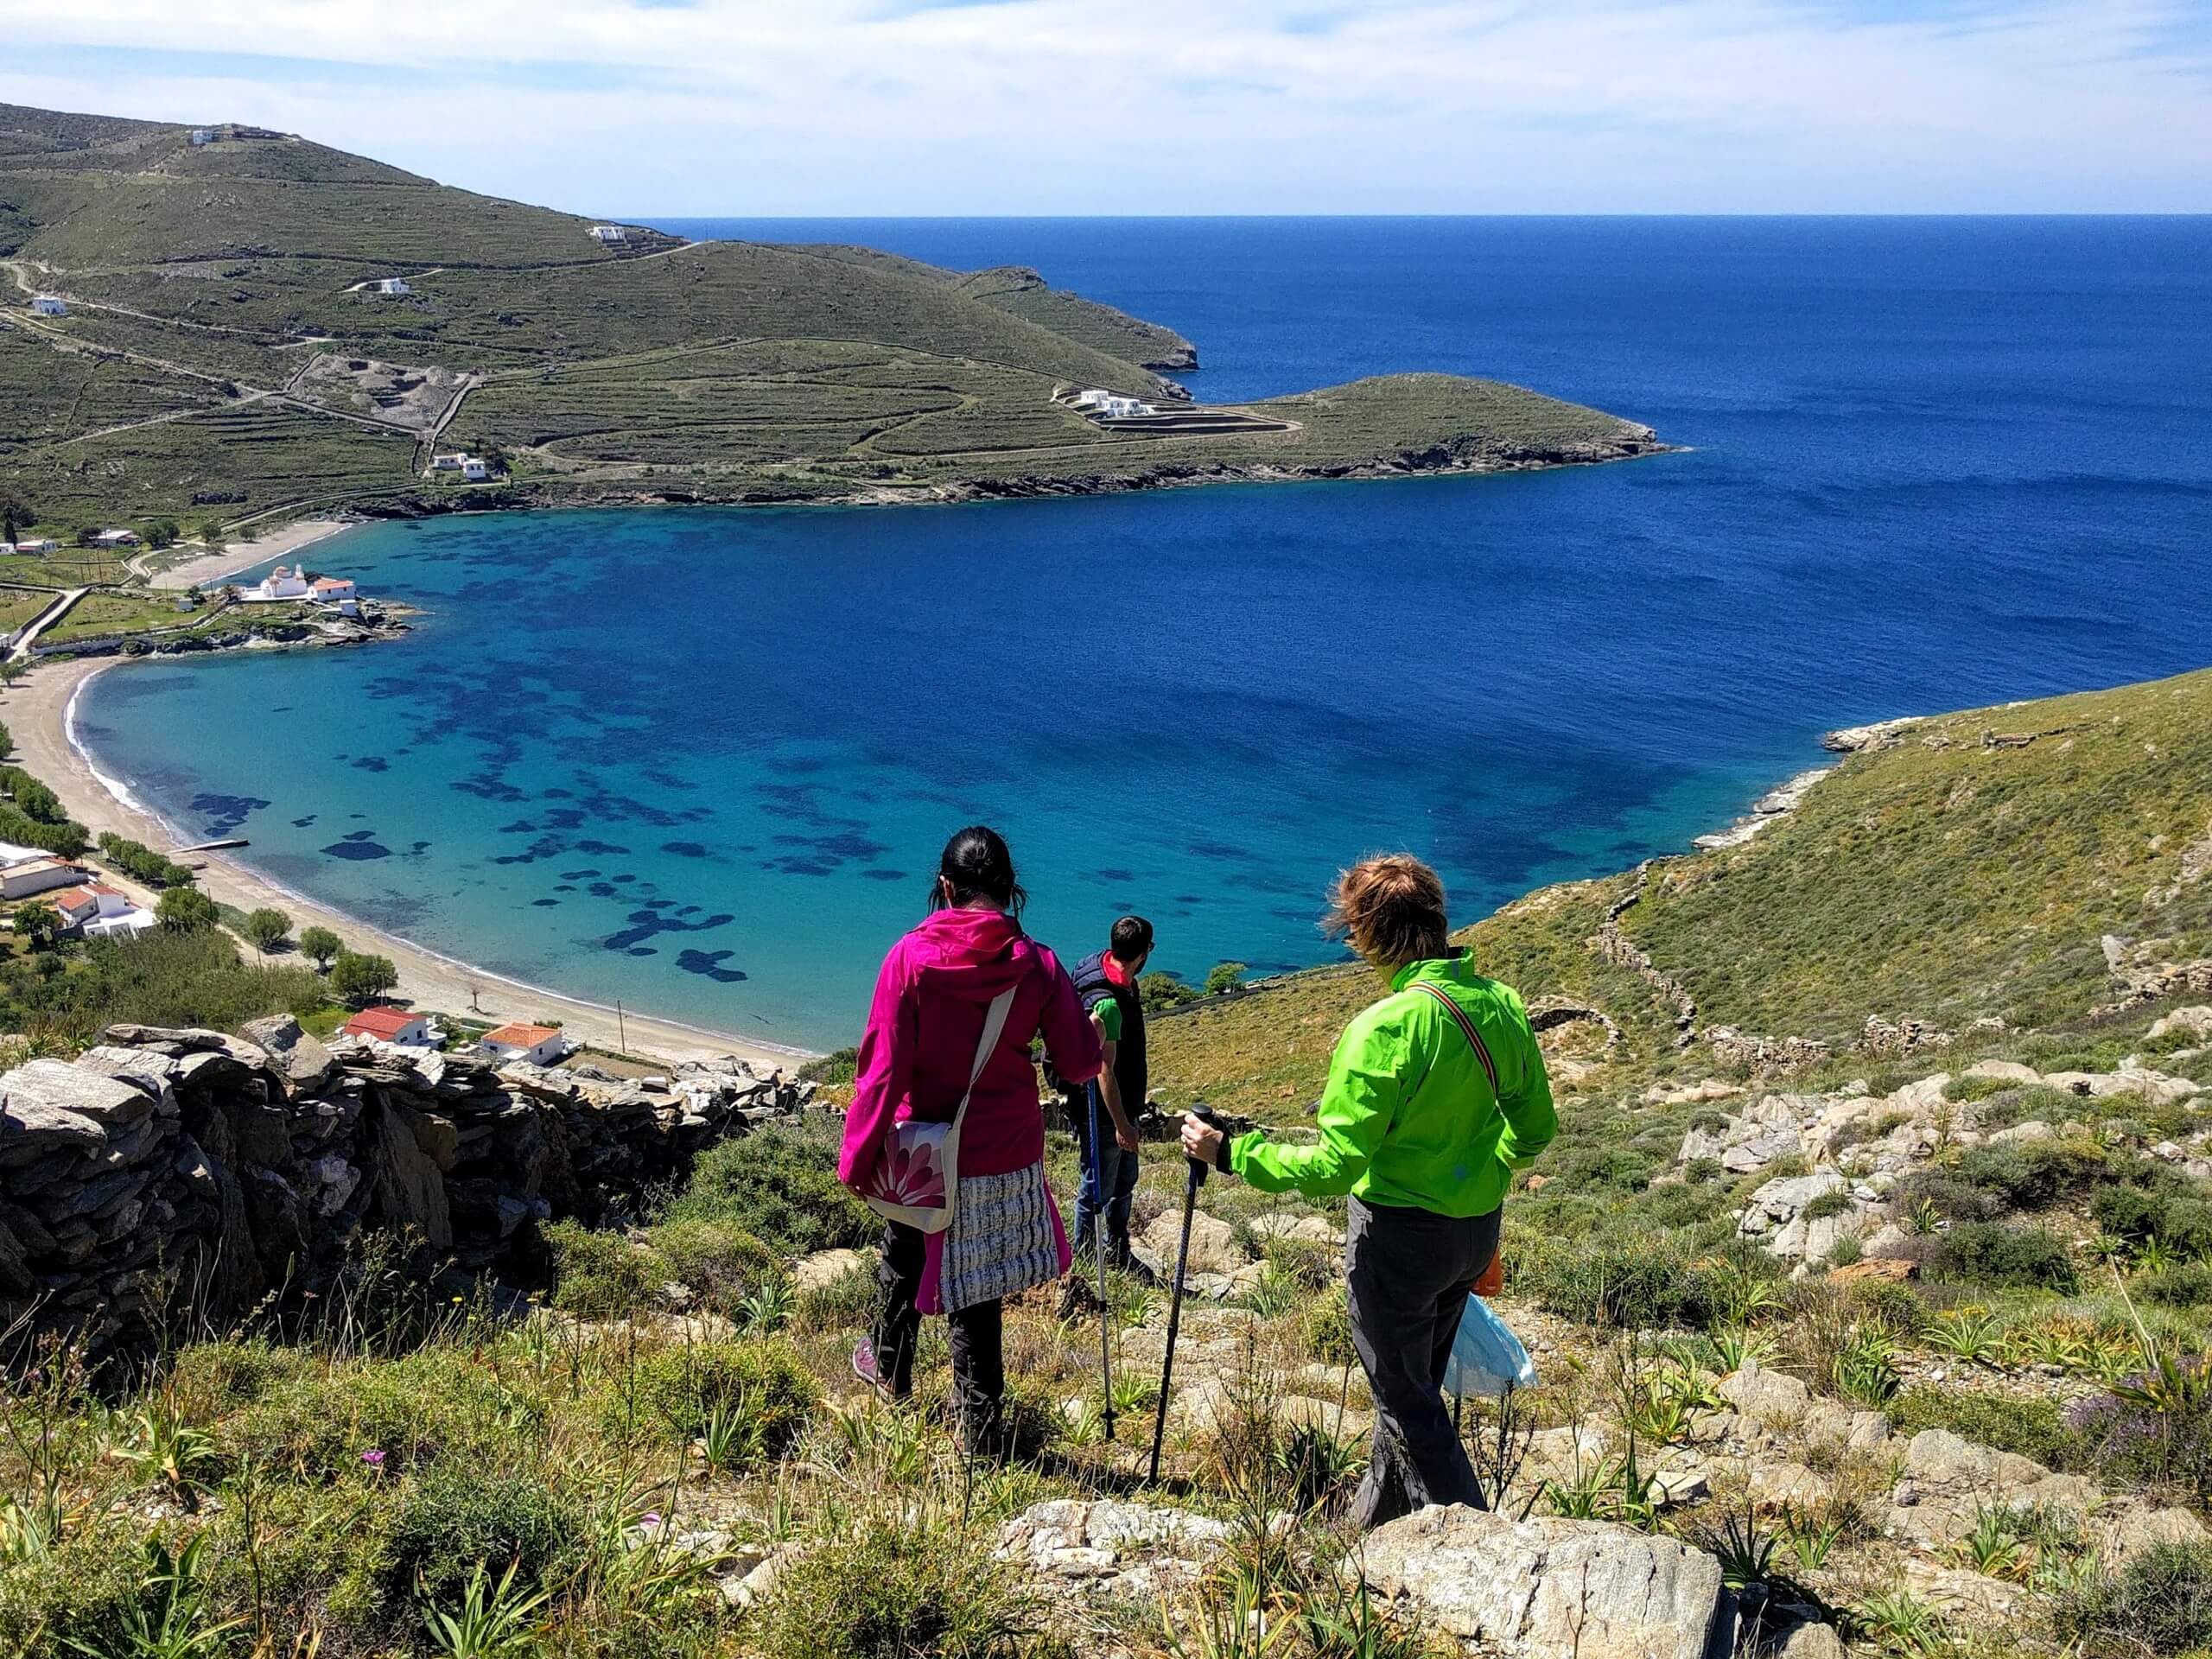 Descending to the bay in Kythnos Island